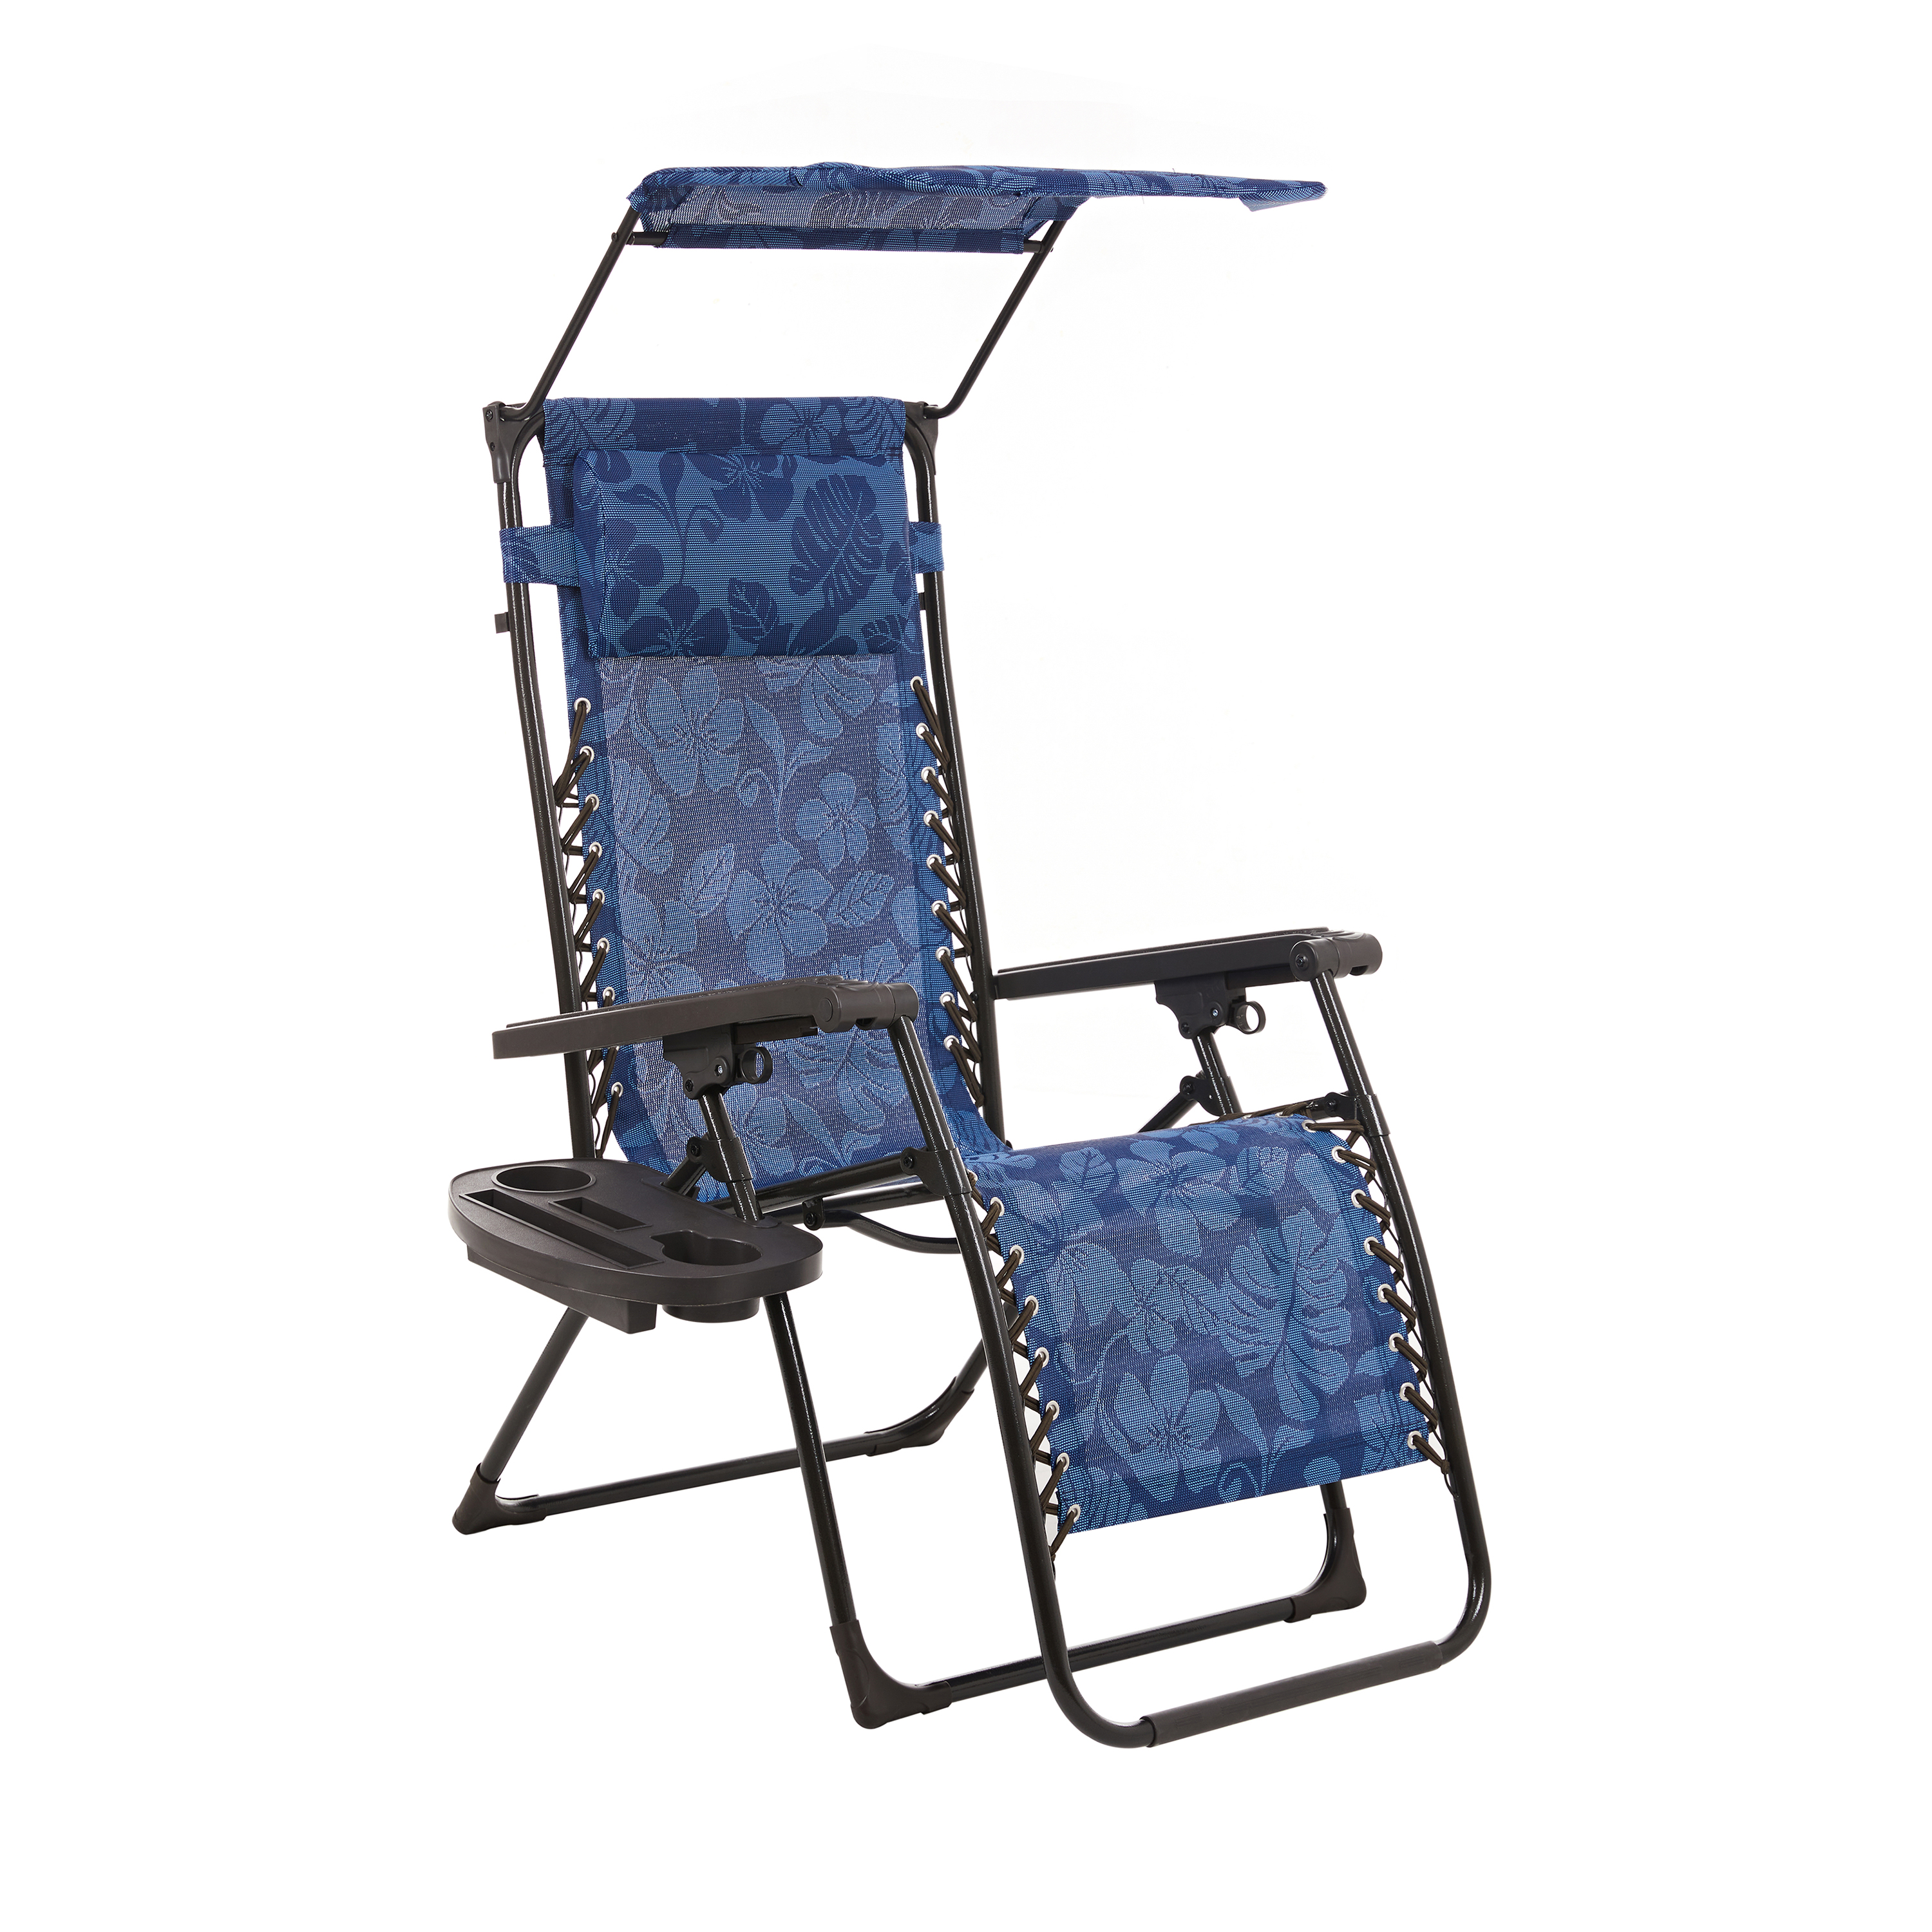 Bliss Hammocks Blue Flower 26" Wide Zero Gravity Chair w/ Adjustable Canopy, Drink Tray & Pillow, 300 Lb. Capacity - image 1 of 13